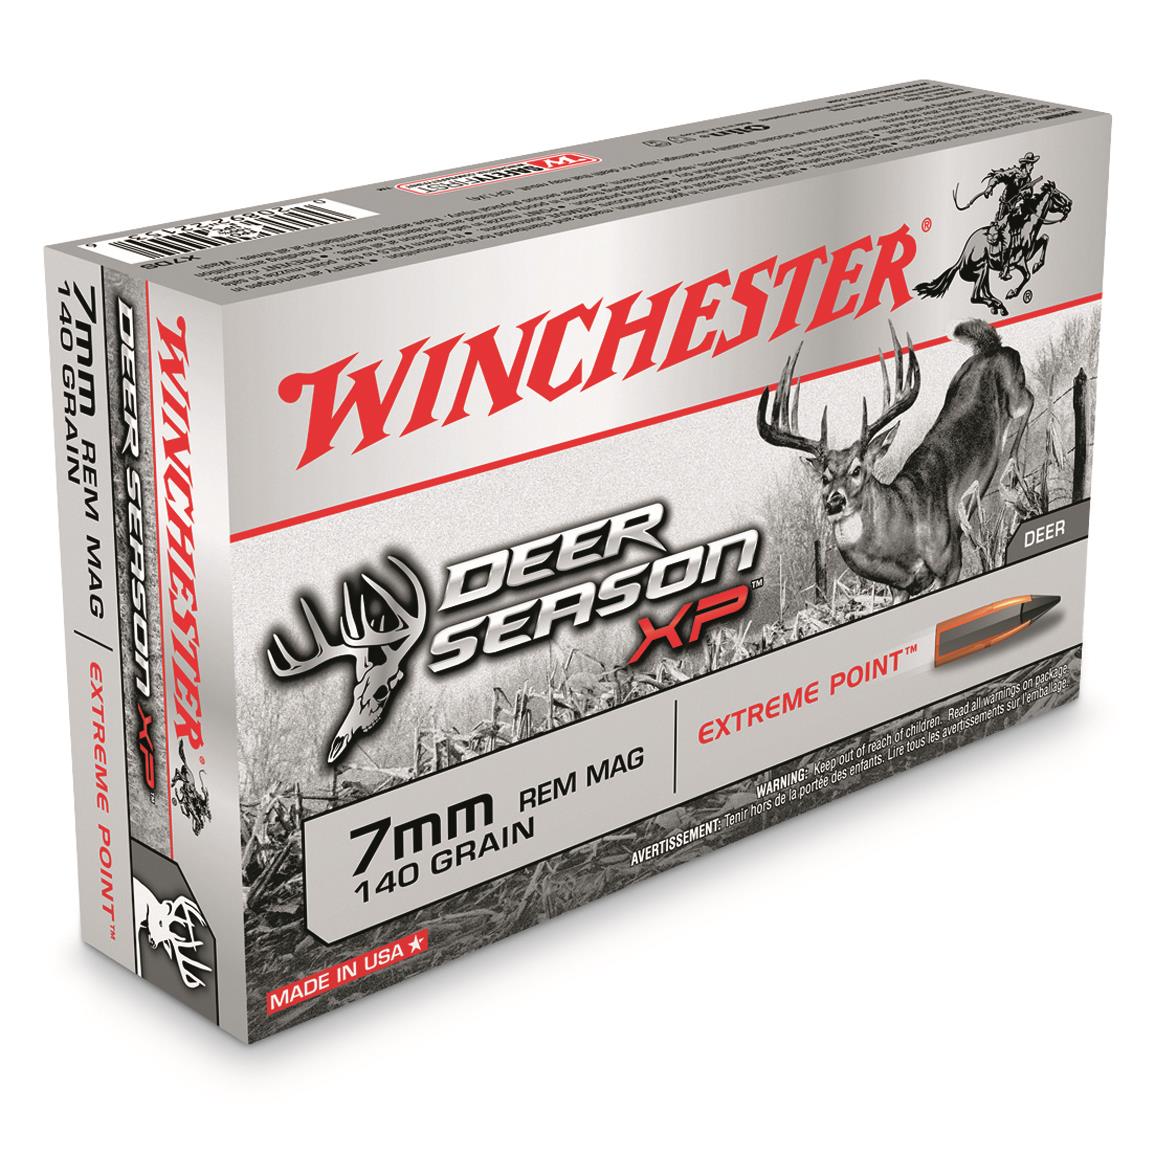 Winchester Deer Season XP, 7mm Rem. Mag., Polymer-Tipped Extreme Point, 140 Grain, 20 Rounds